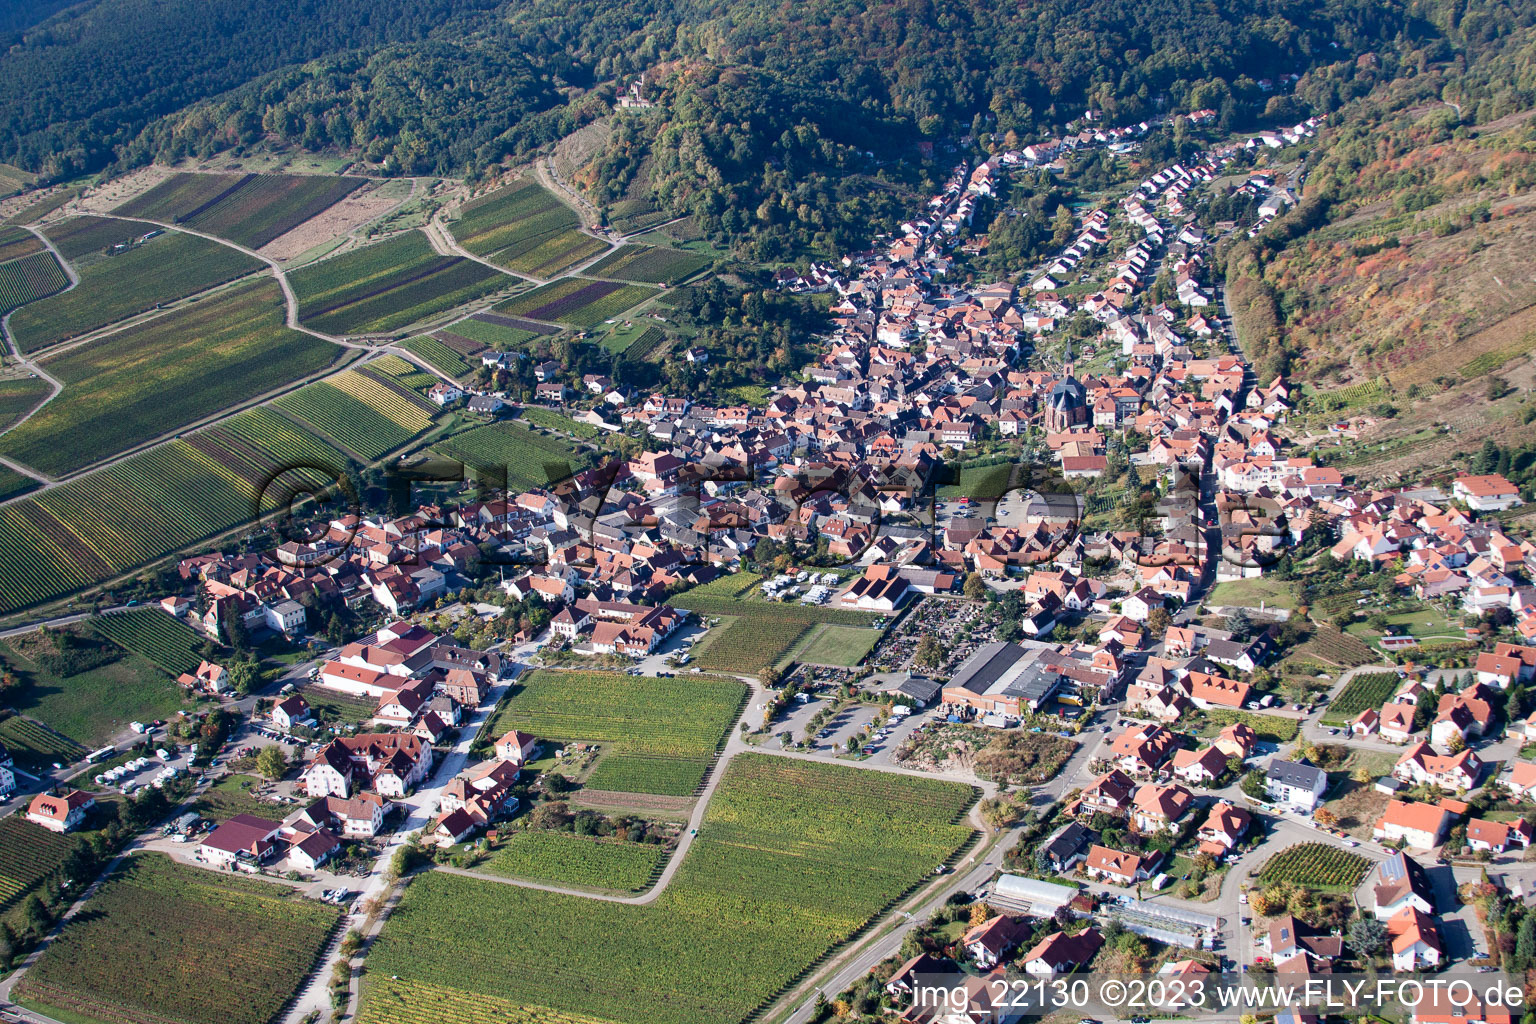 Drone image of Maikammer in the state Rhineland-Palatinate, Germany